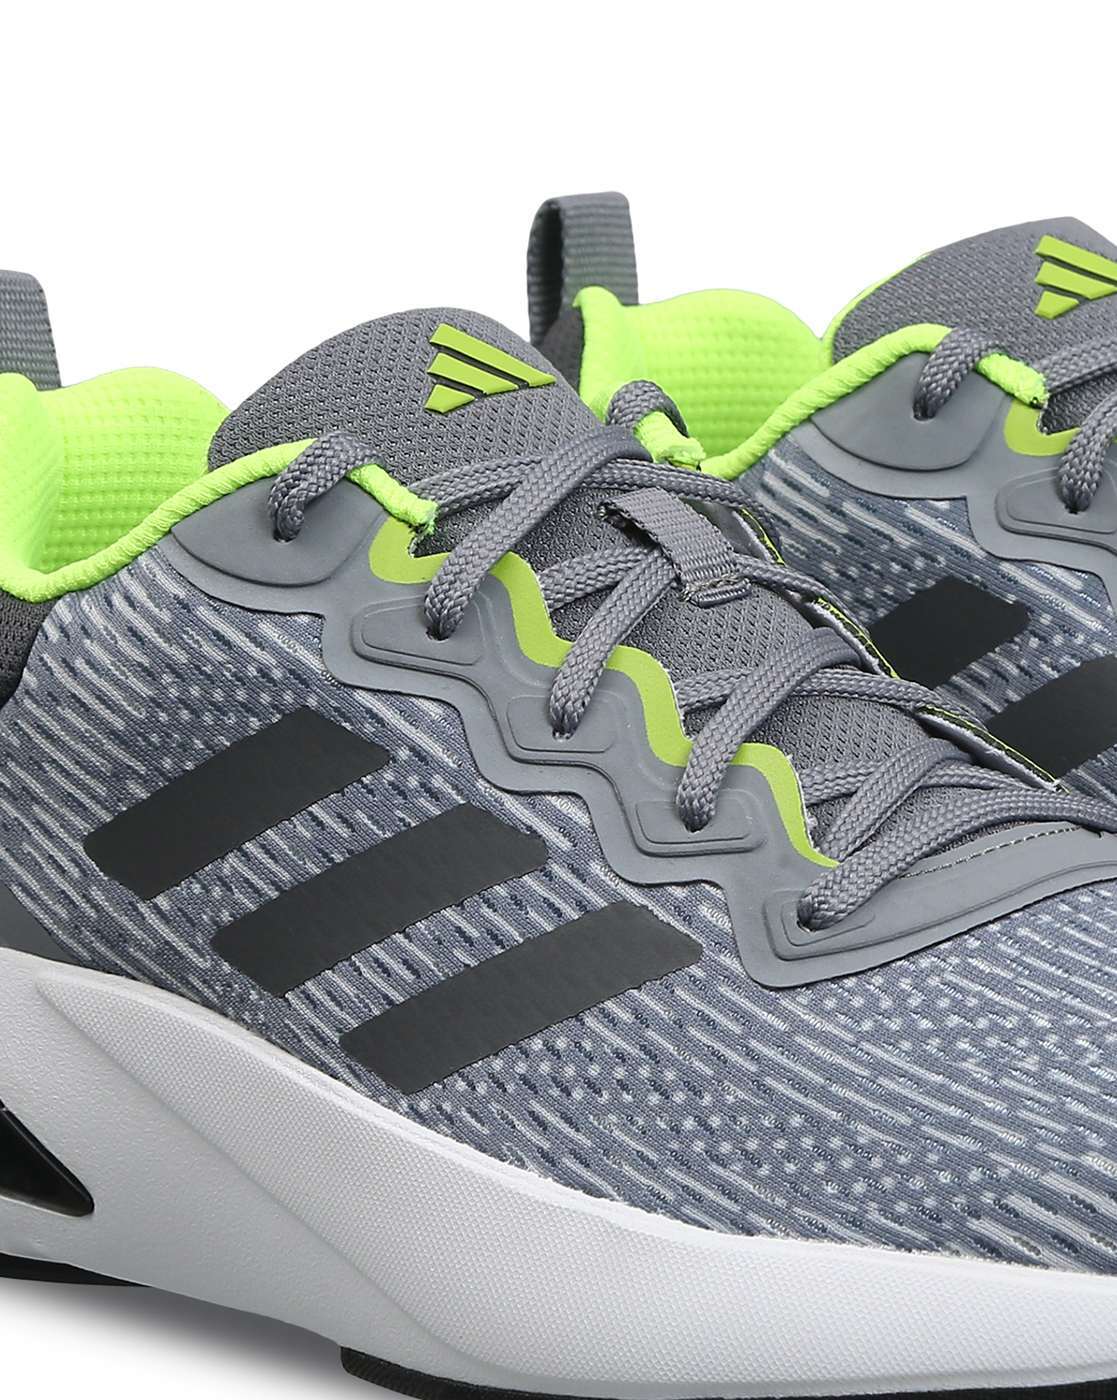 ADIDAS Clear Factor M Running Shoes For Men - Buy ADIDAS Clear Factor M Running  Shoes For Men Online at Best Price - Shop Online for Footwears in India |  Flipkart.com